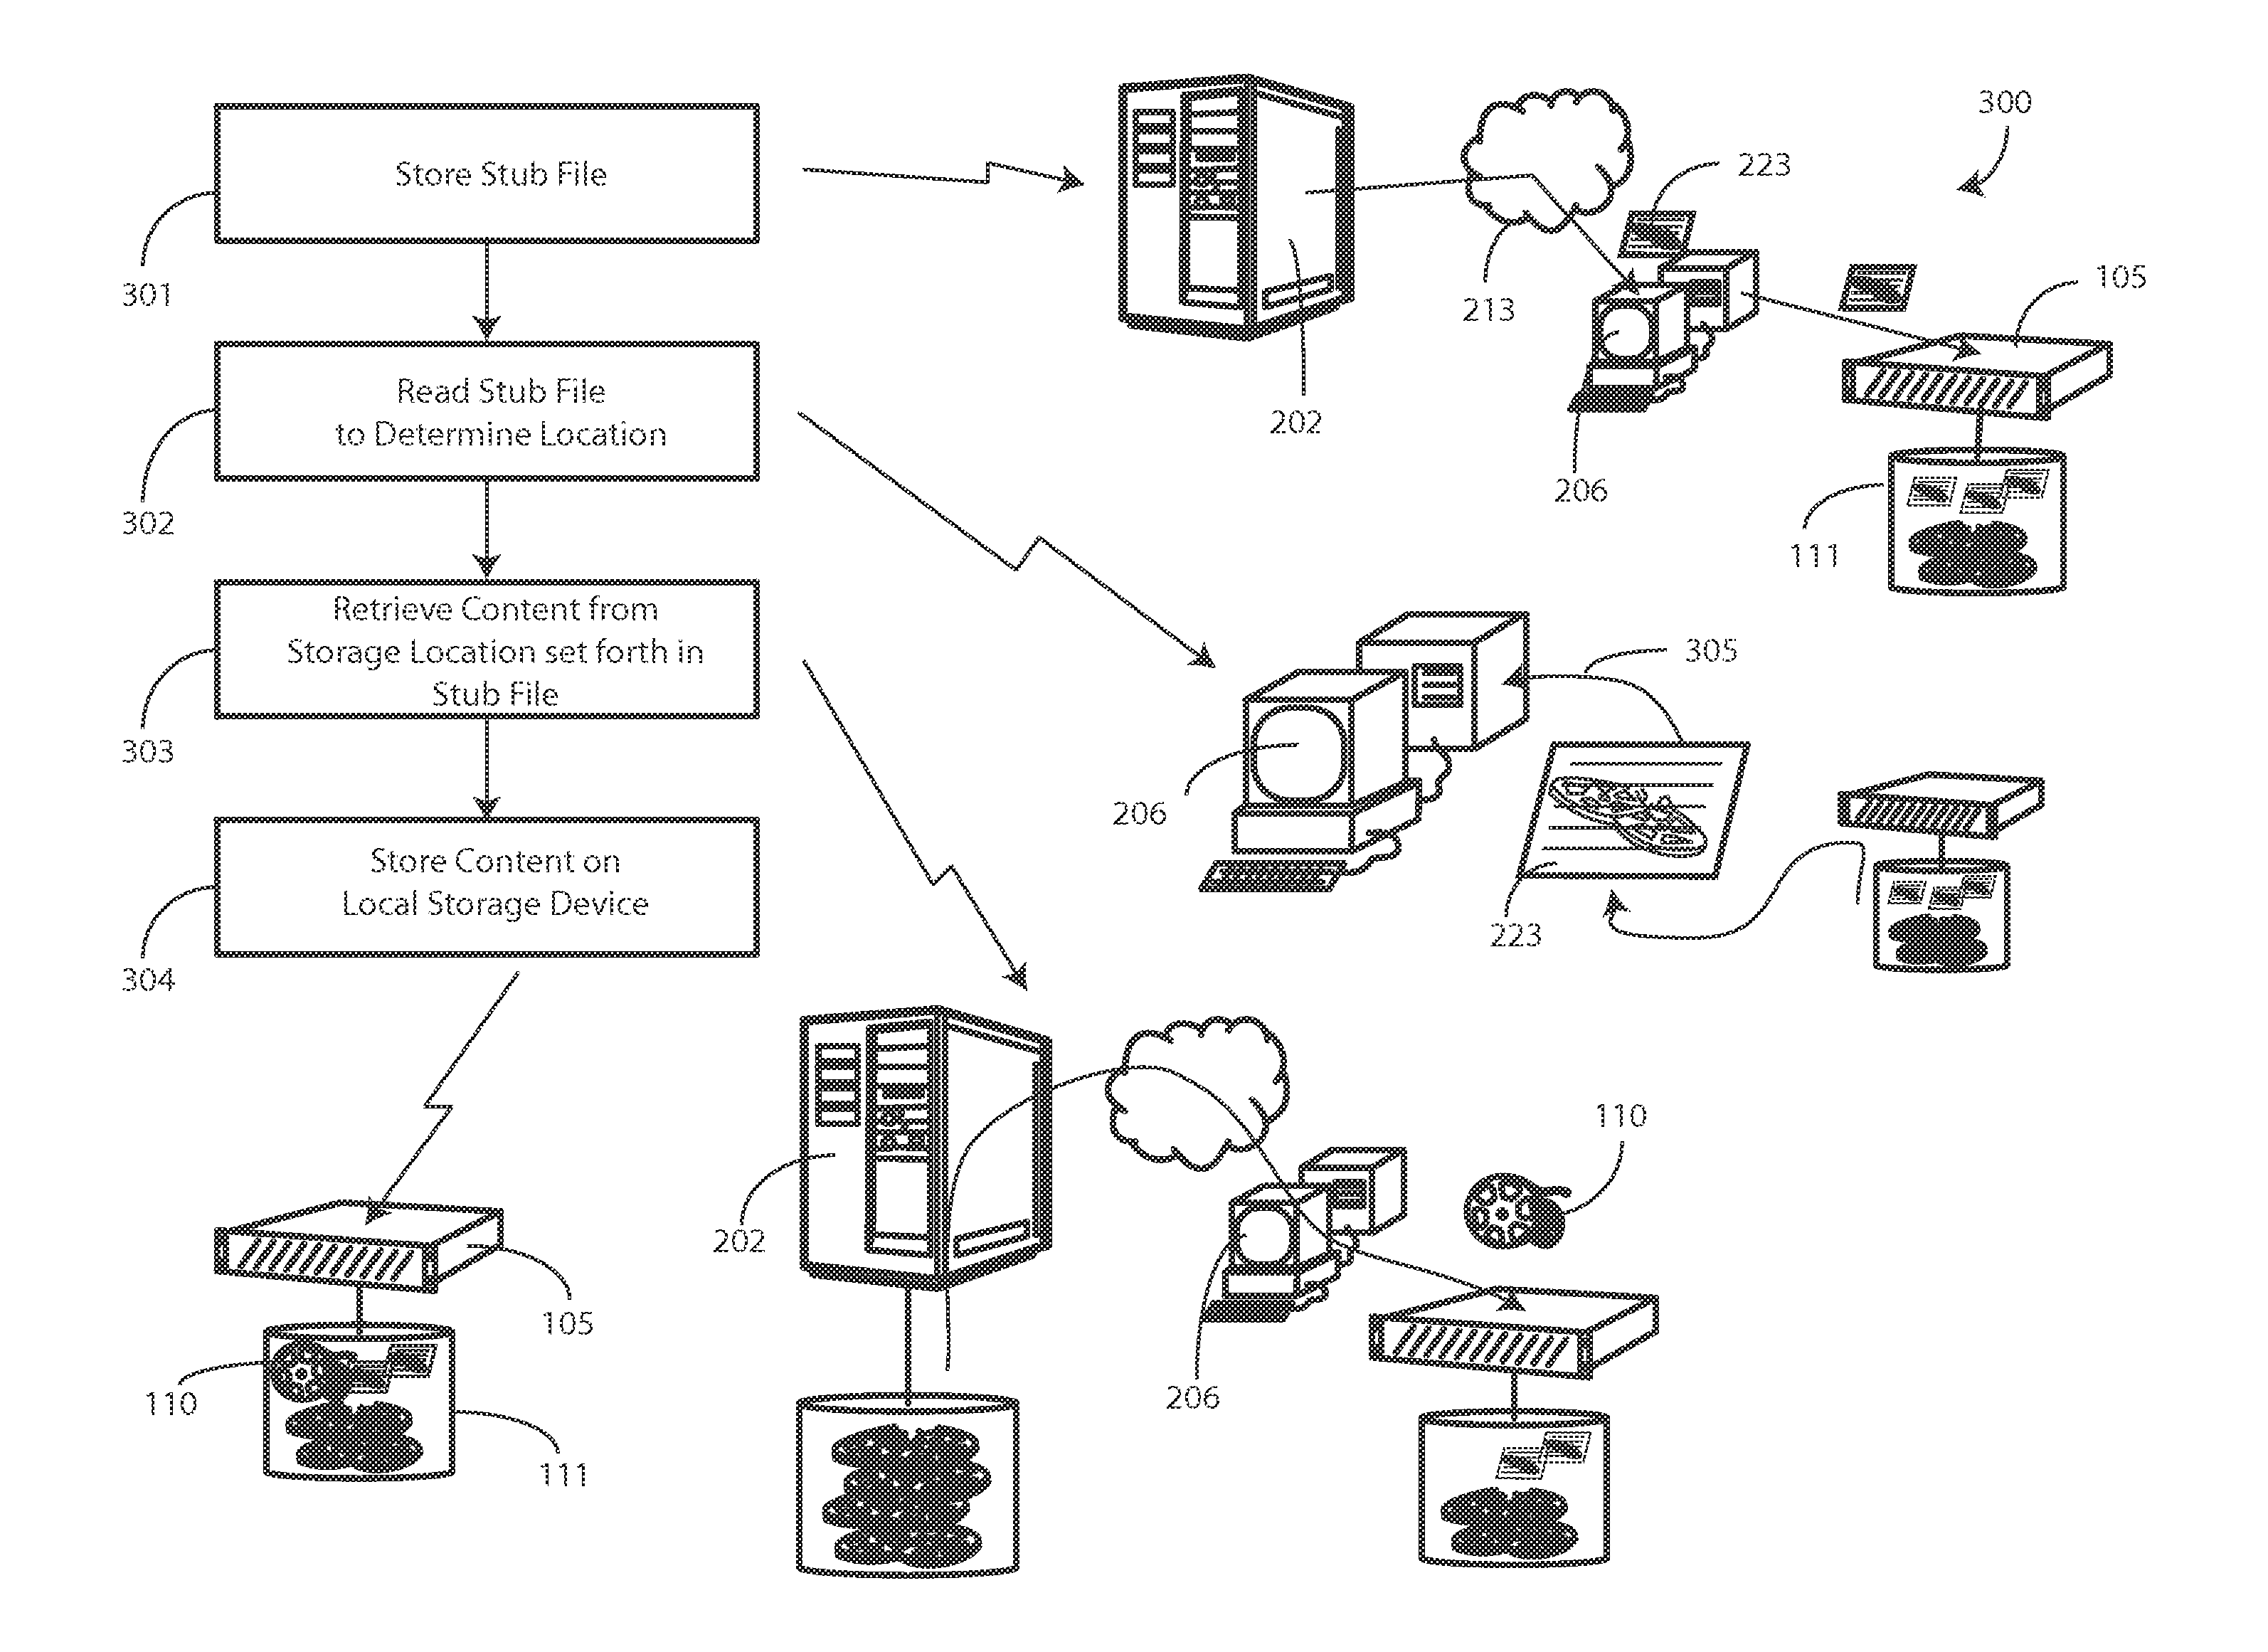 Demand-Based Edge Caching Video Conten System and Method